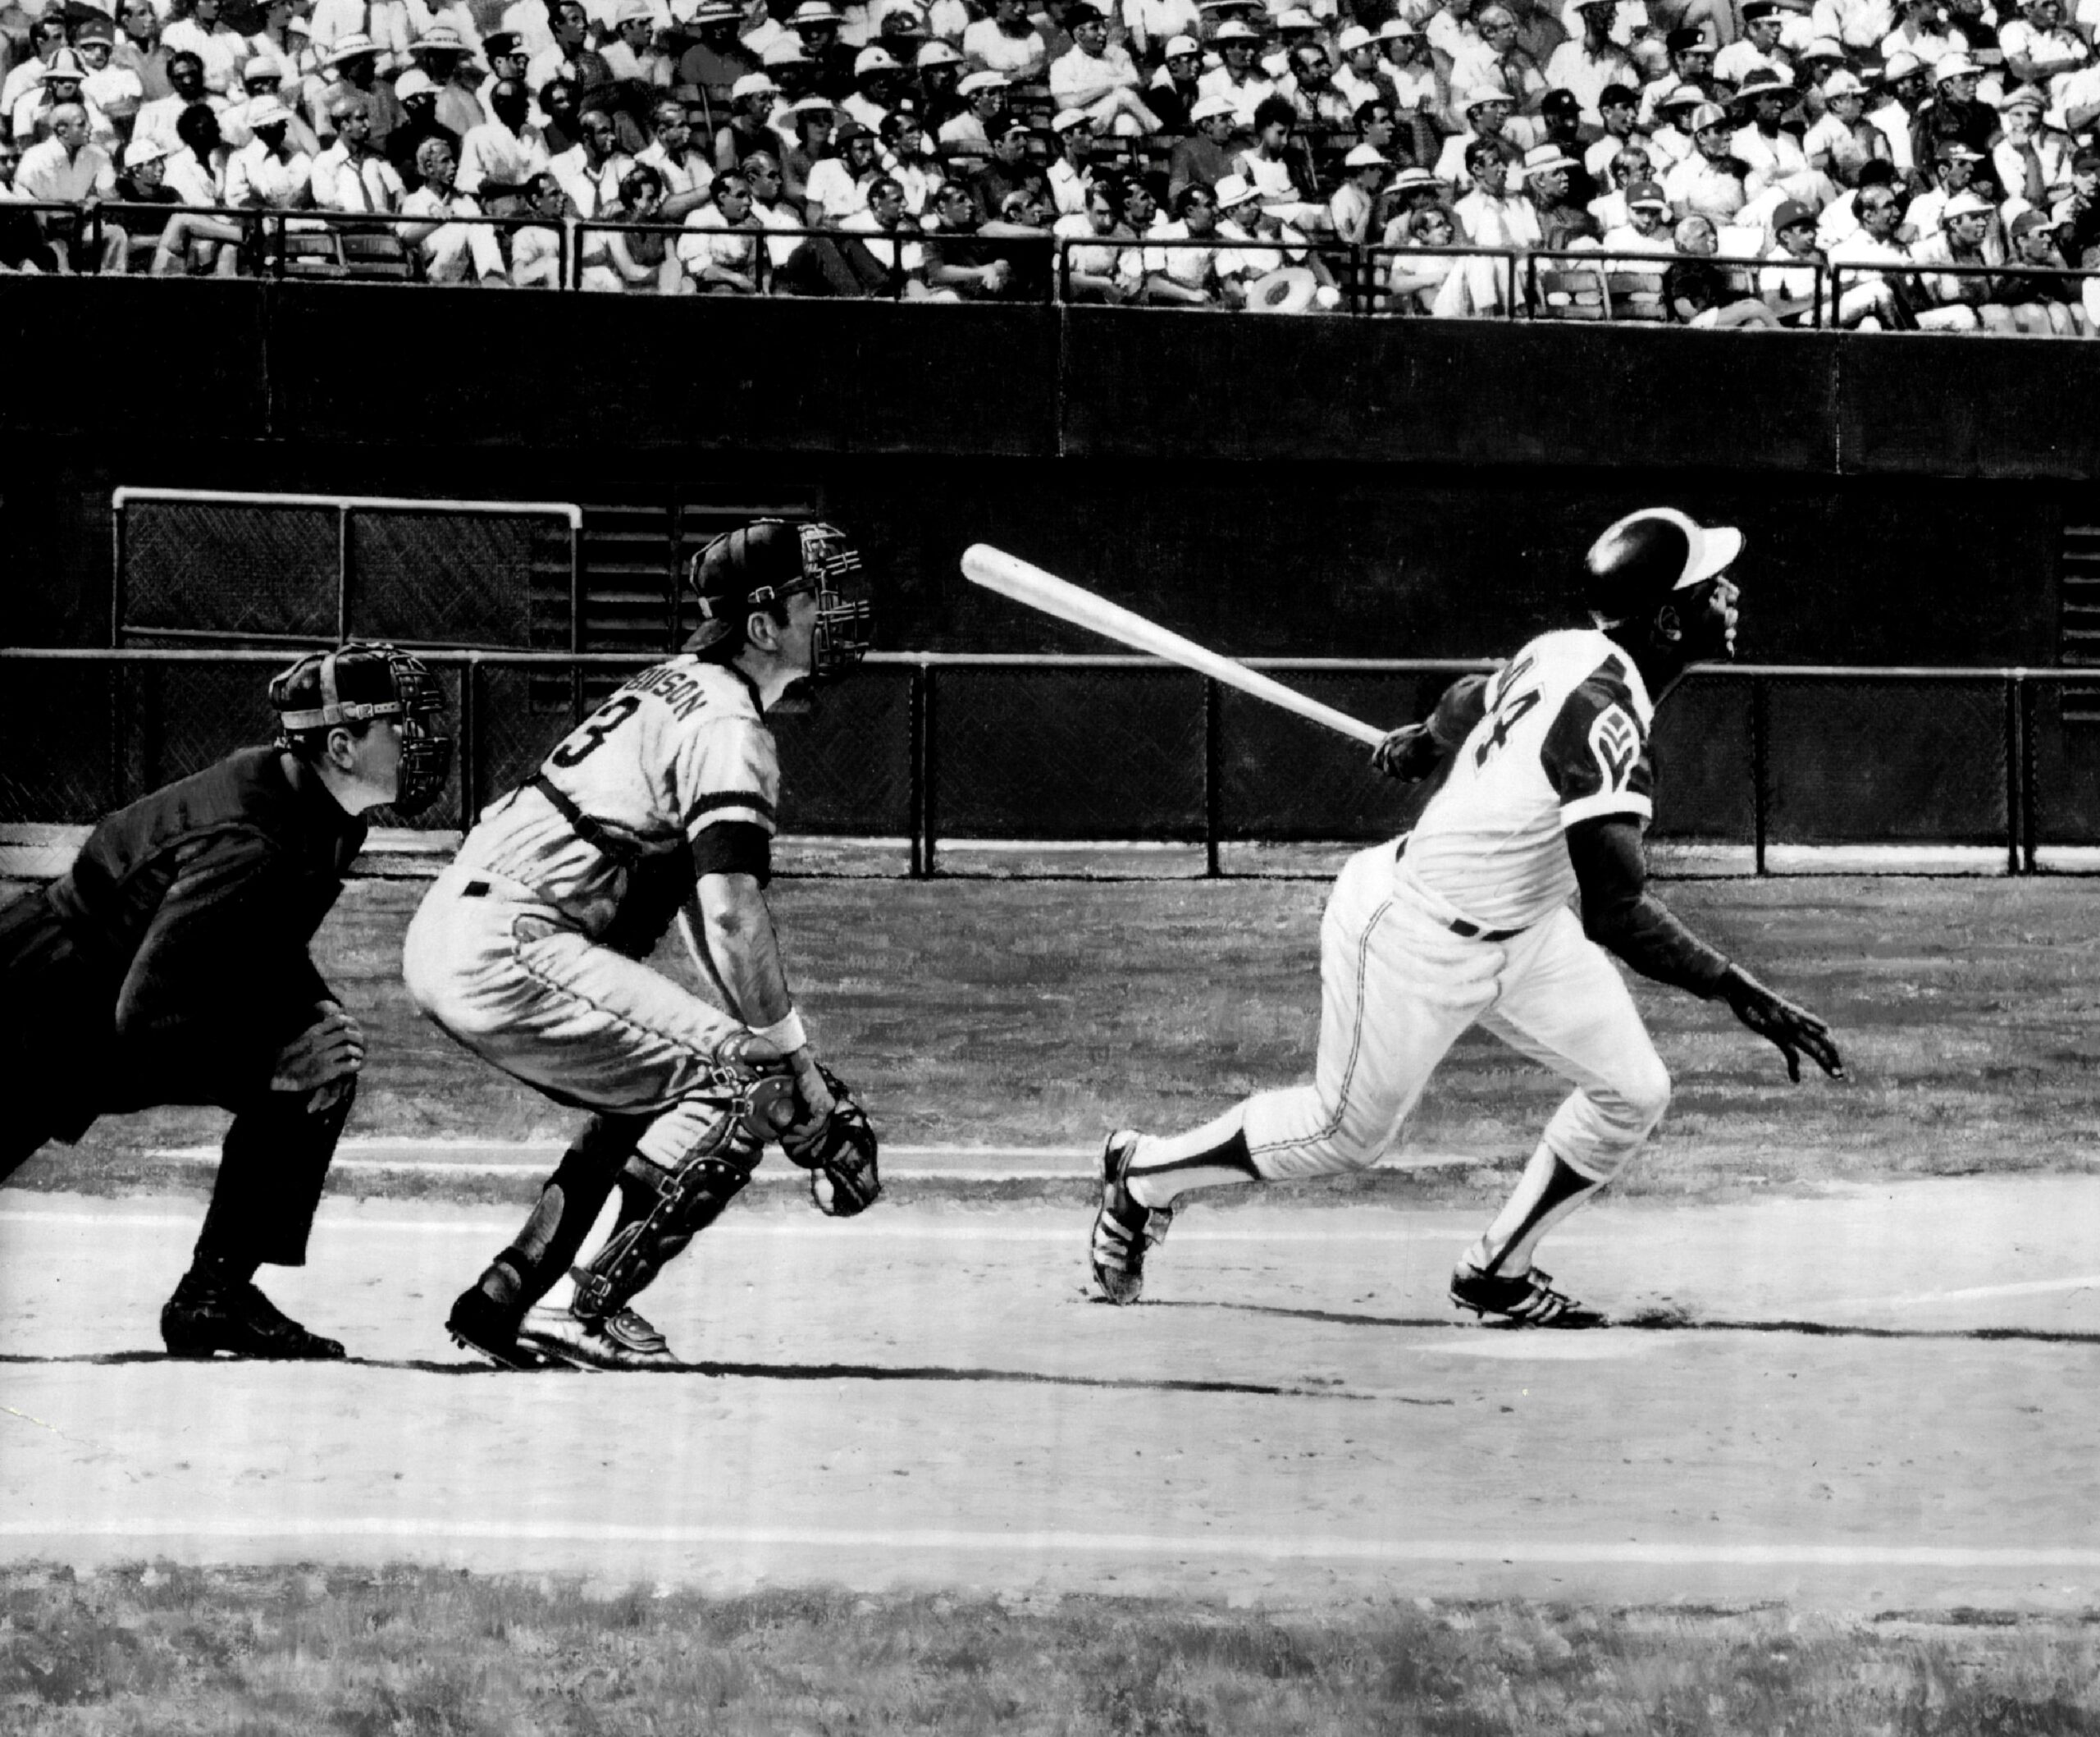 ATLANTA, GEORGIA, - APRIL 8, 1974:  Hank Aaron hits his 715th home run, breaking Babe Ruth's long-standing record of 714 lifetime home runs. 
Photo Credit: Sporting News via Getty Images via Getty Images